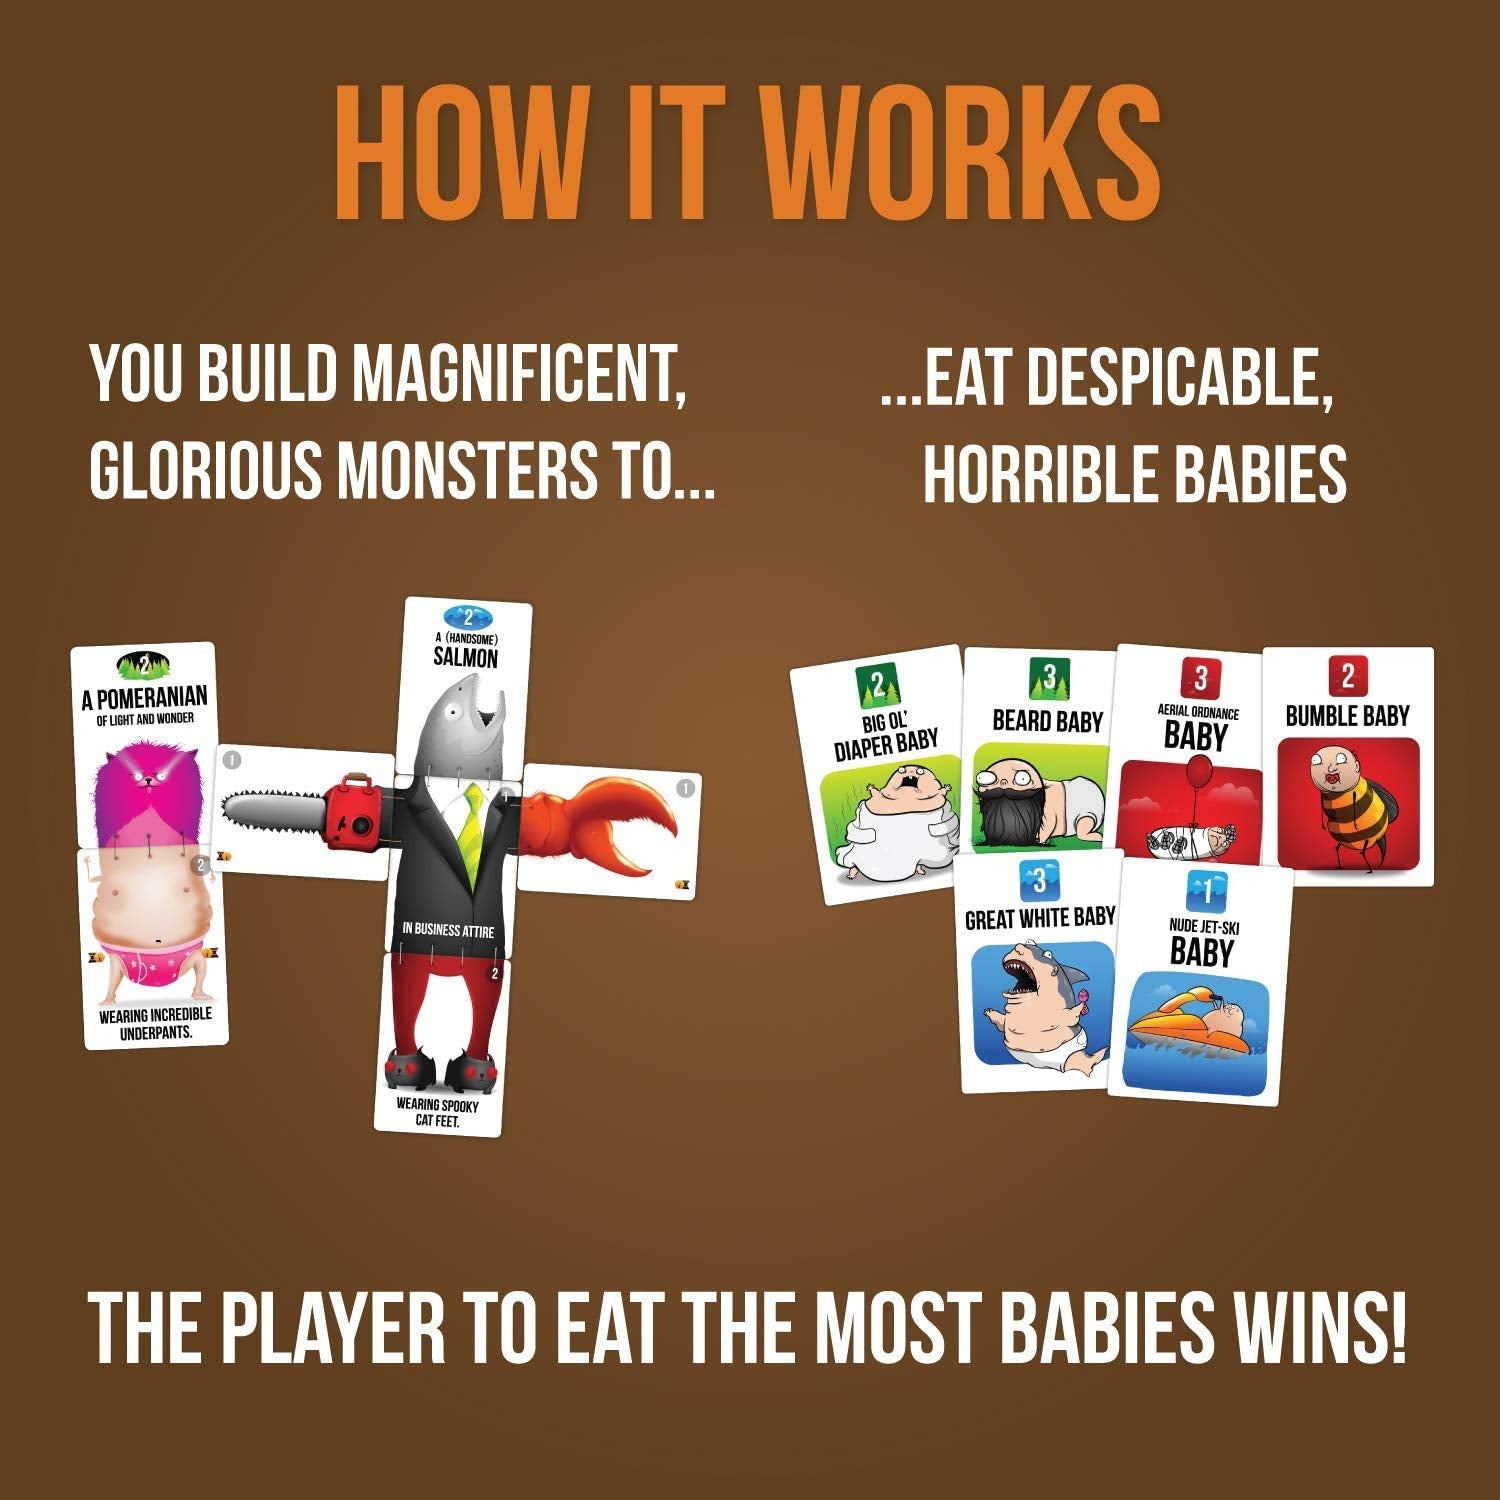 Bears vs Babies by Exploding Kittens - A Monster-Building Card Game - Family-Friendly Party Games - Card Games For Adults, Teens & Kids